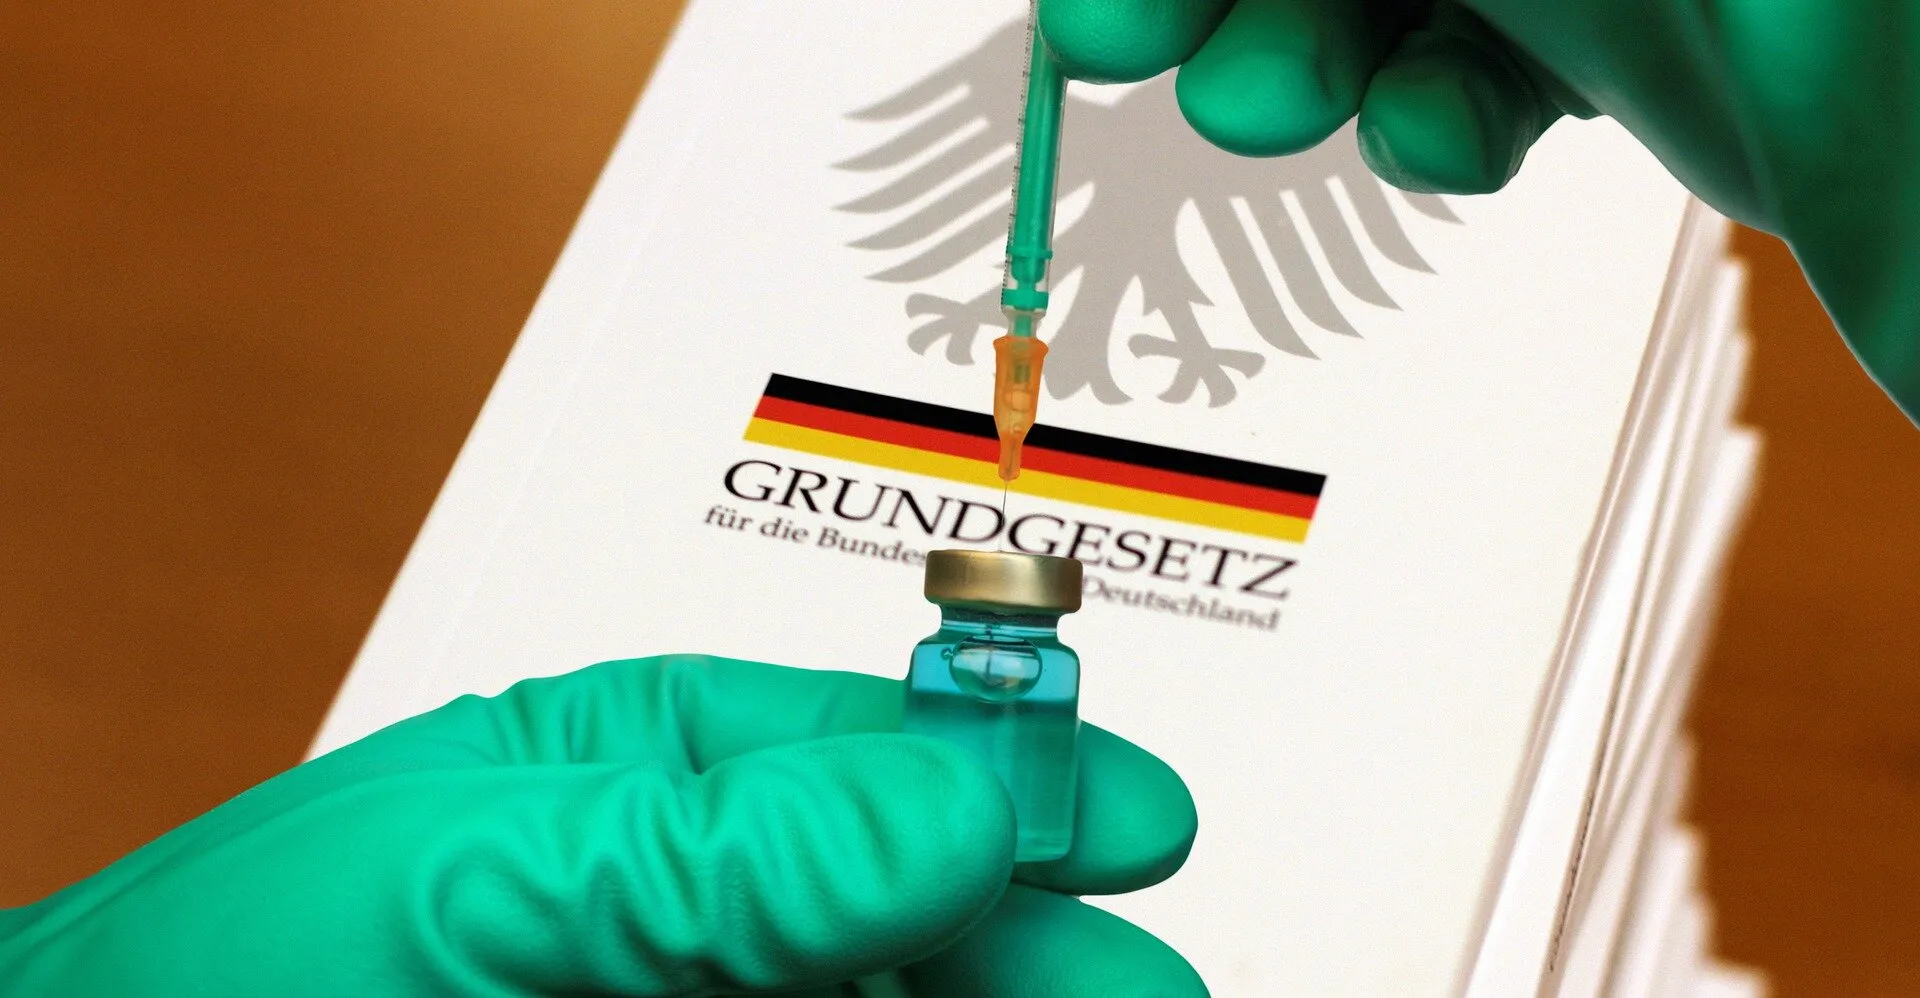 German Study Finds Covid Vaccine Has ‘No Beneficial Effects’ While Massively Increasing Excess Deaths